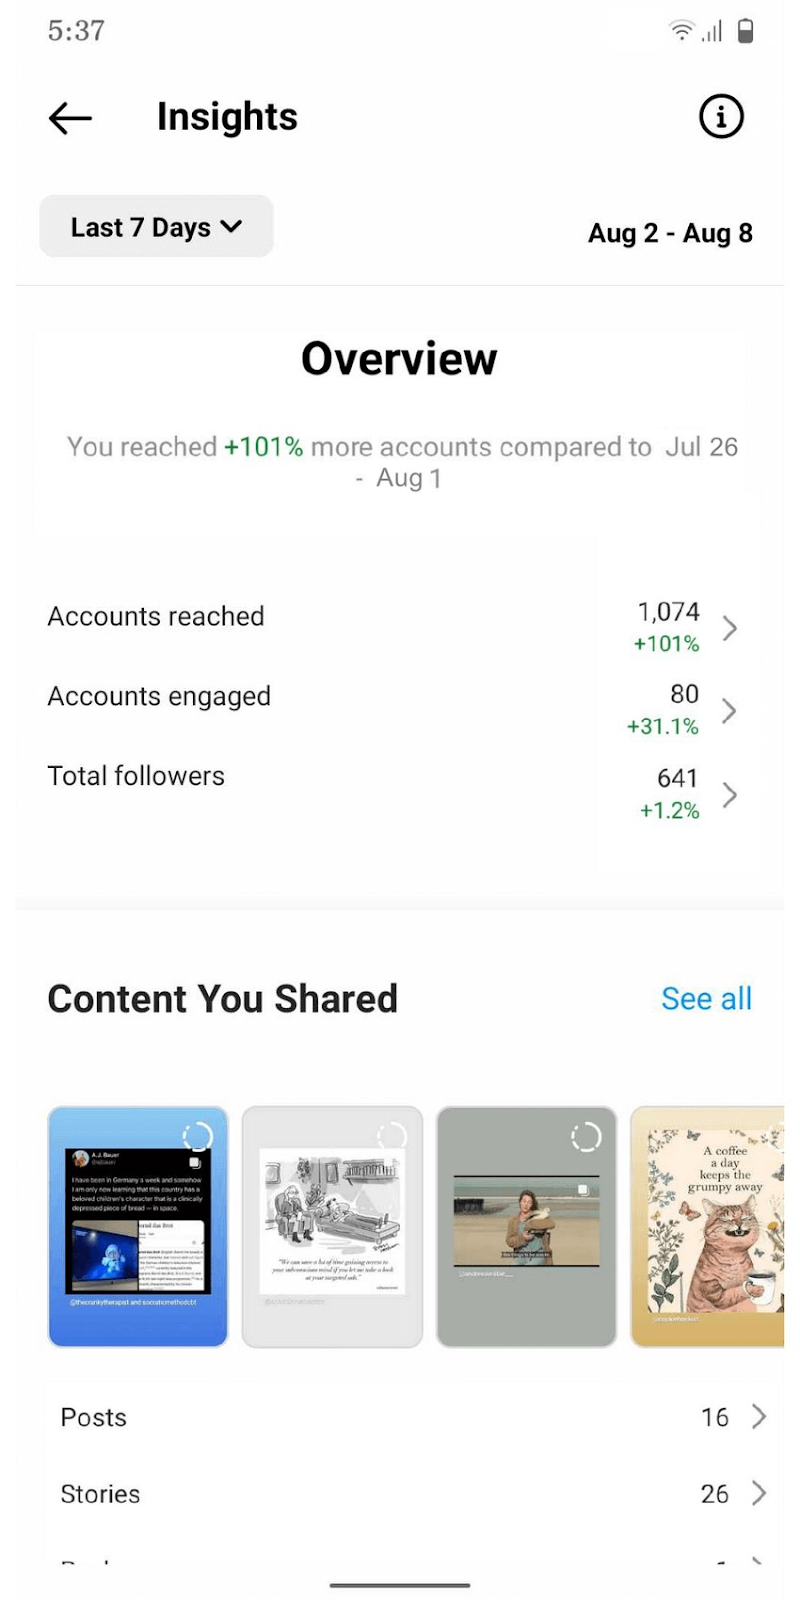 an example of Insights dashboard from Instagram that shows several metrics like "accounts reached" "accounts engaged" and "total followers"